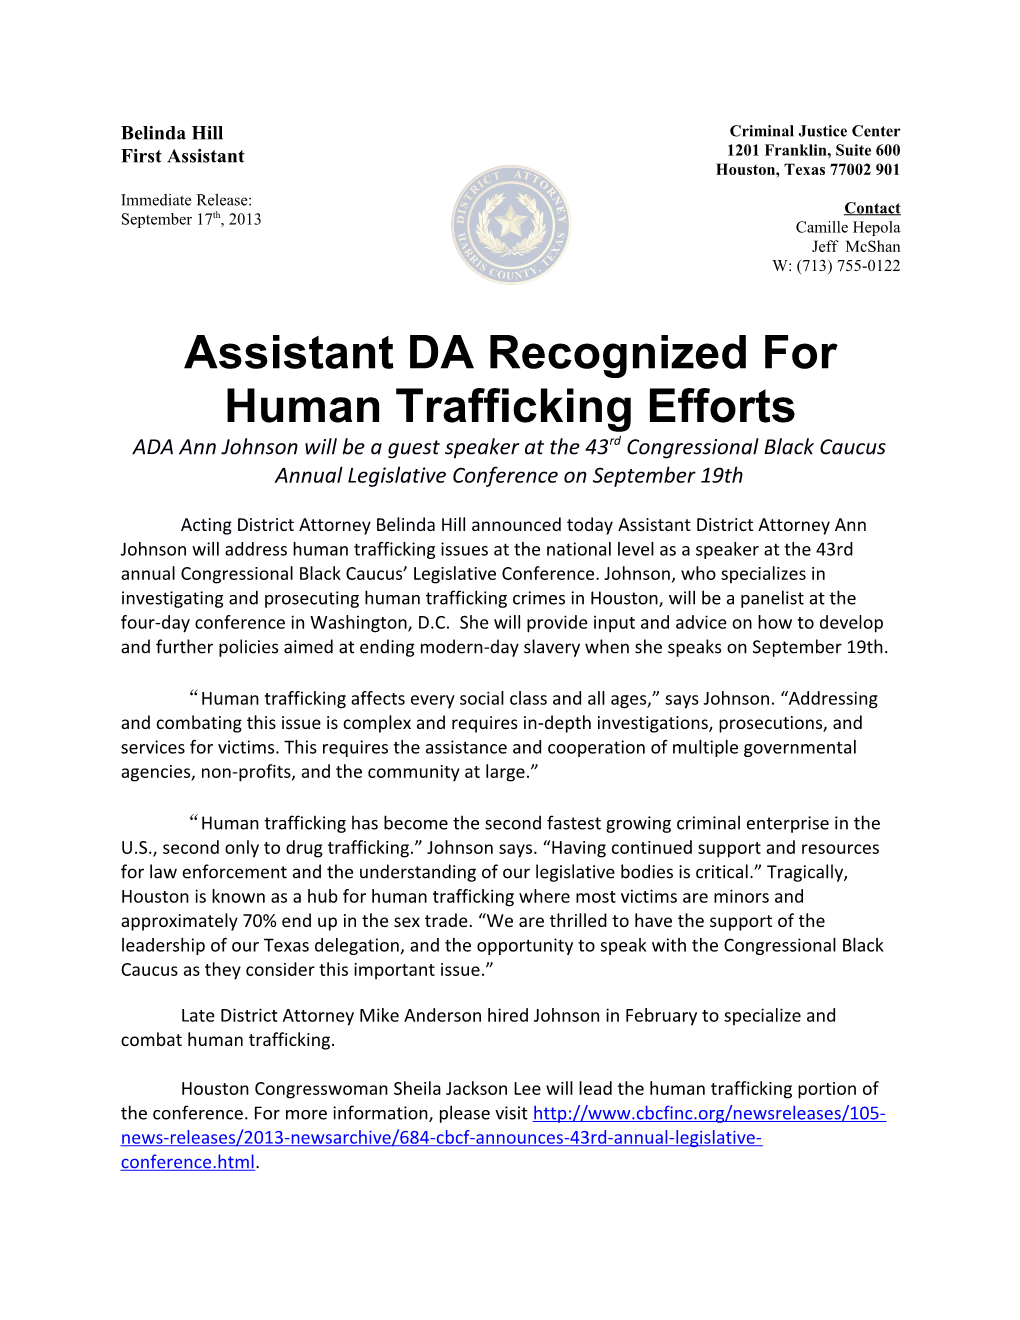 Assistant DA Recognized for Human Trafficking Efforts